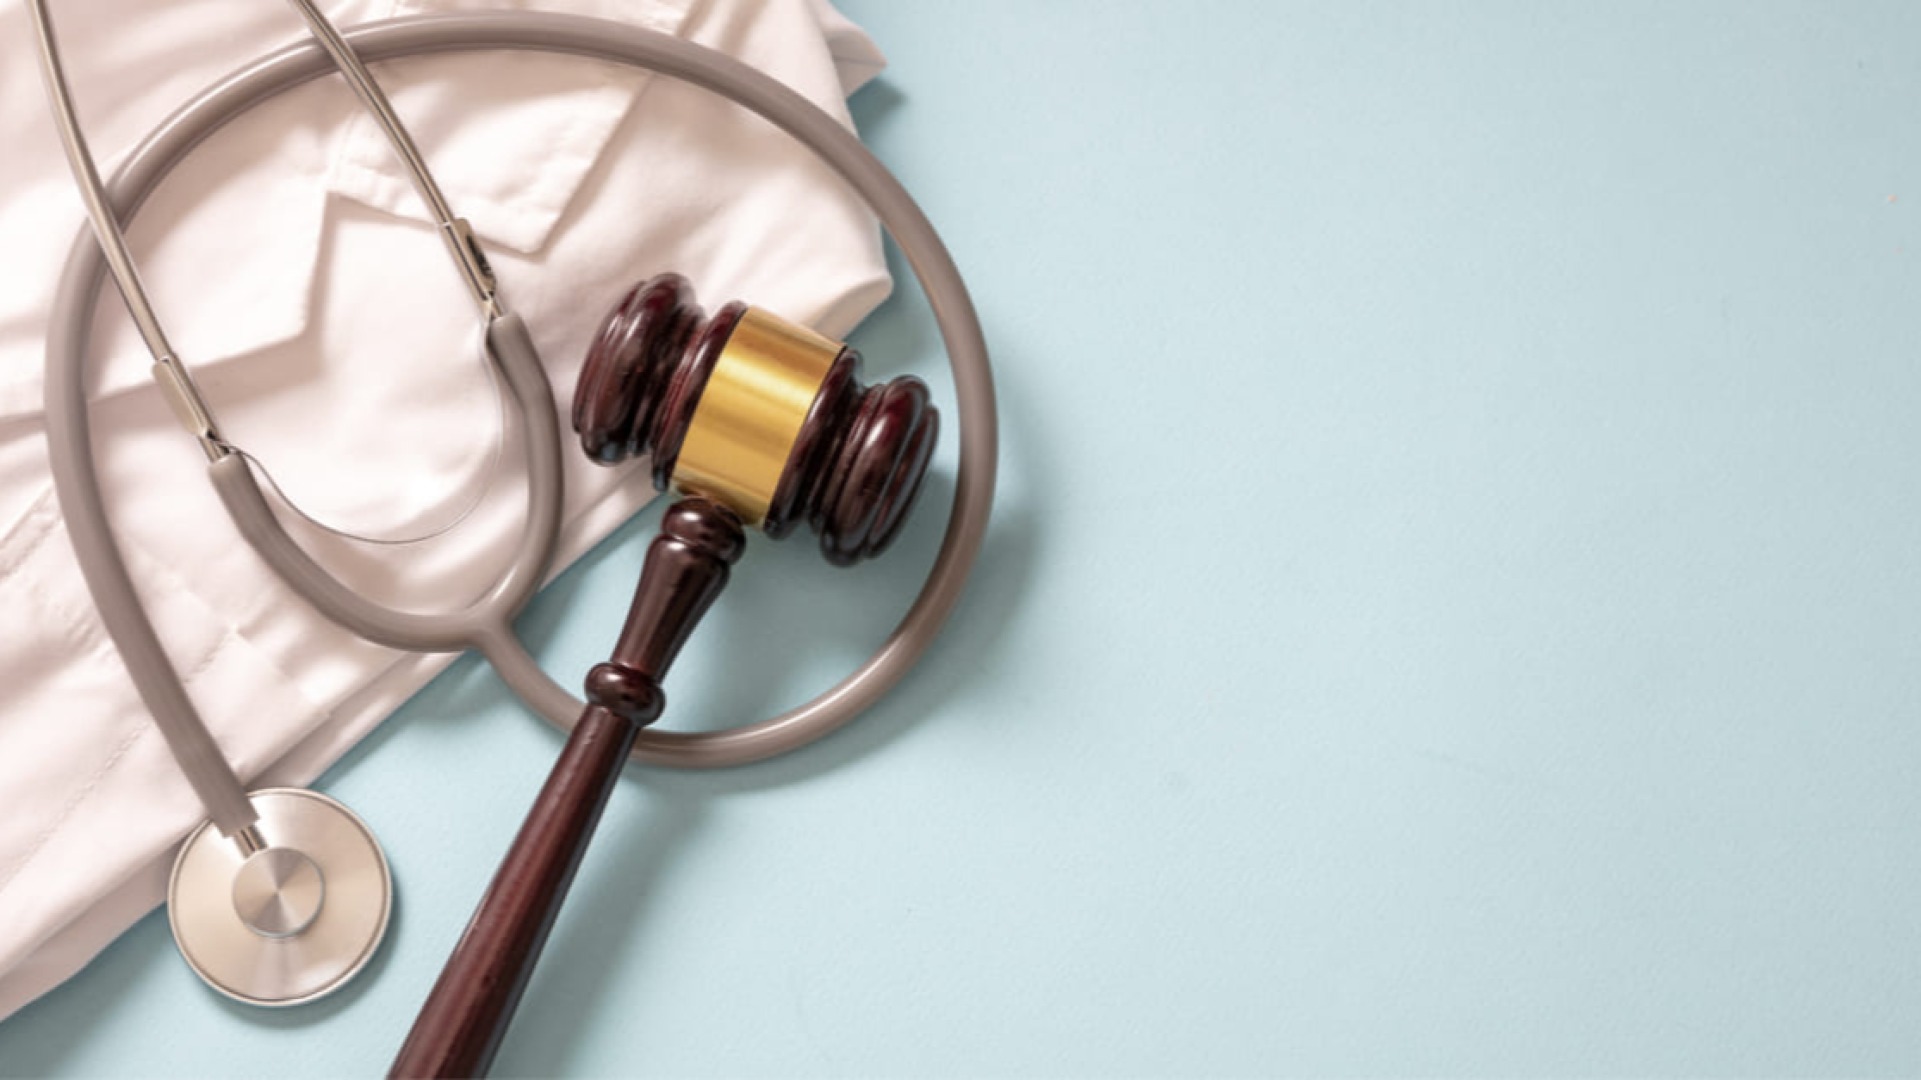 HOW MUCH WOULD A CLAIM FOR MEDICAL NEGLIGENCE COST YOU?